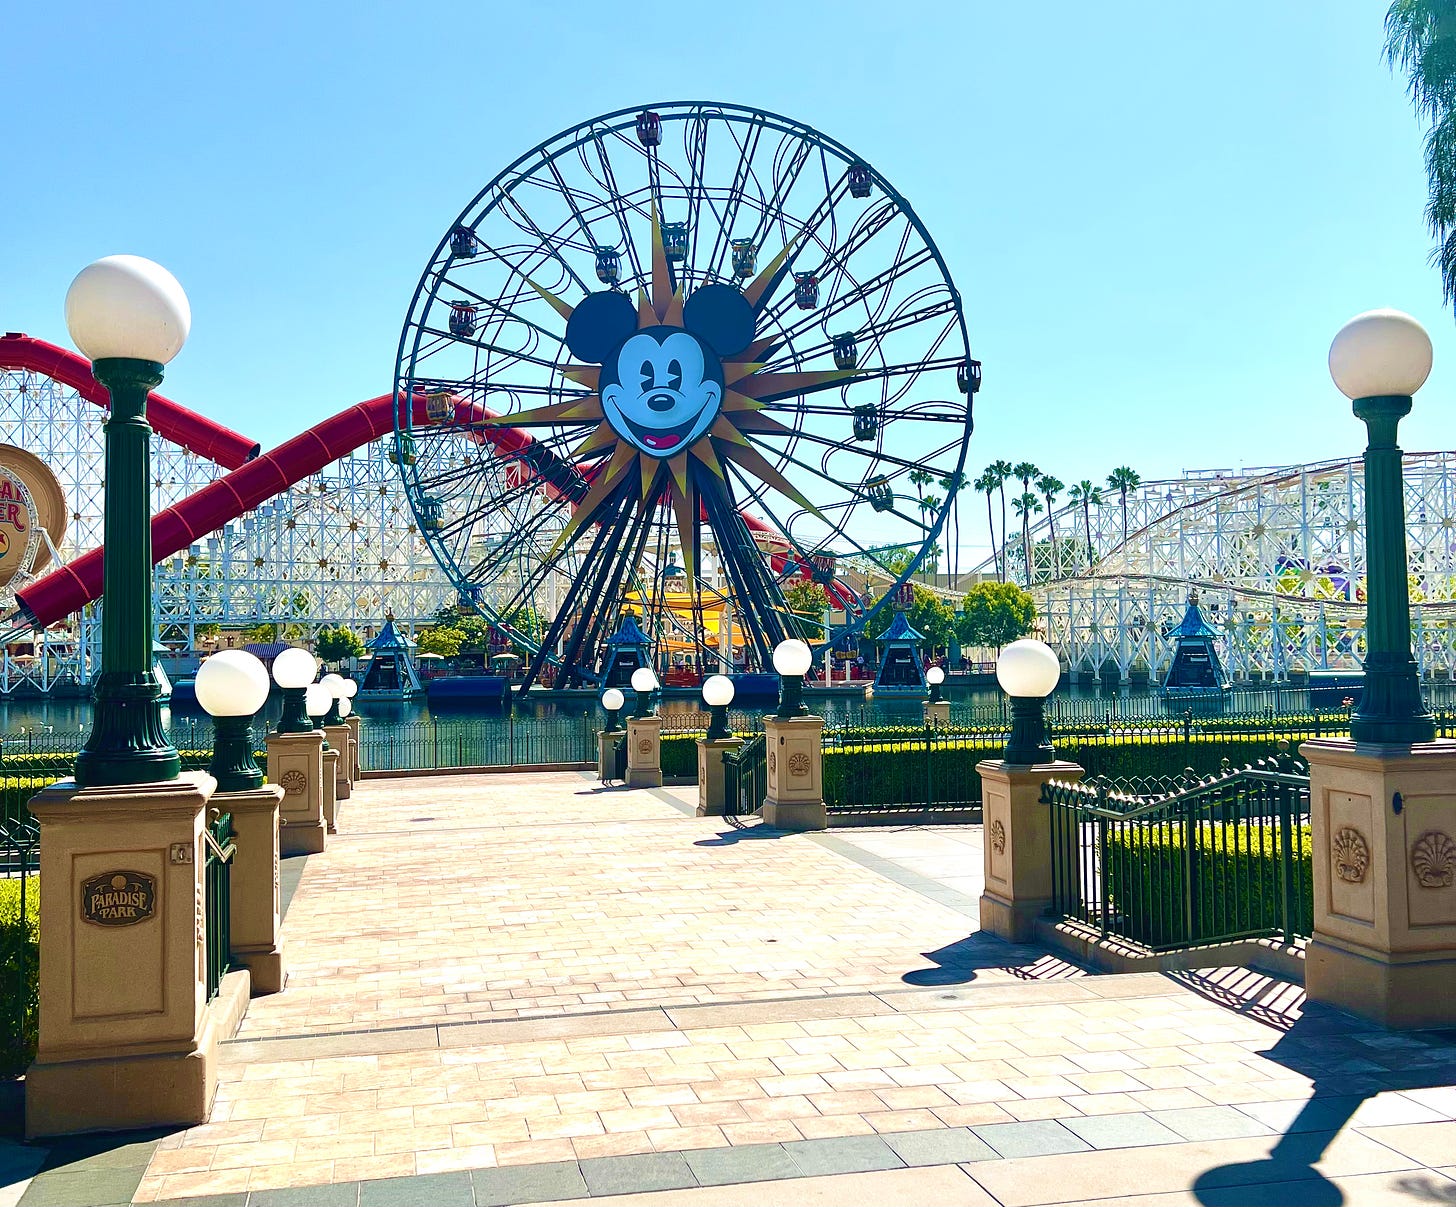 Disney's Pixar Pier Ferris Wheel with the Incredicoaster in the background